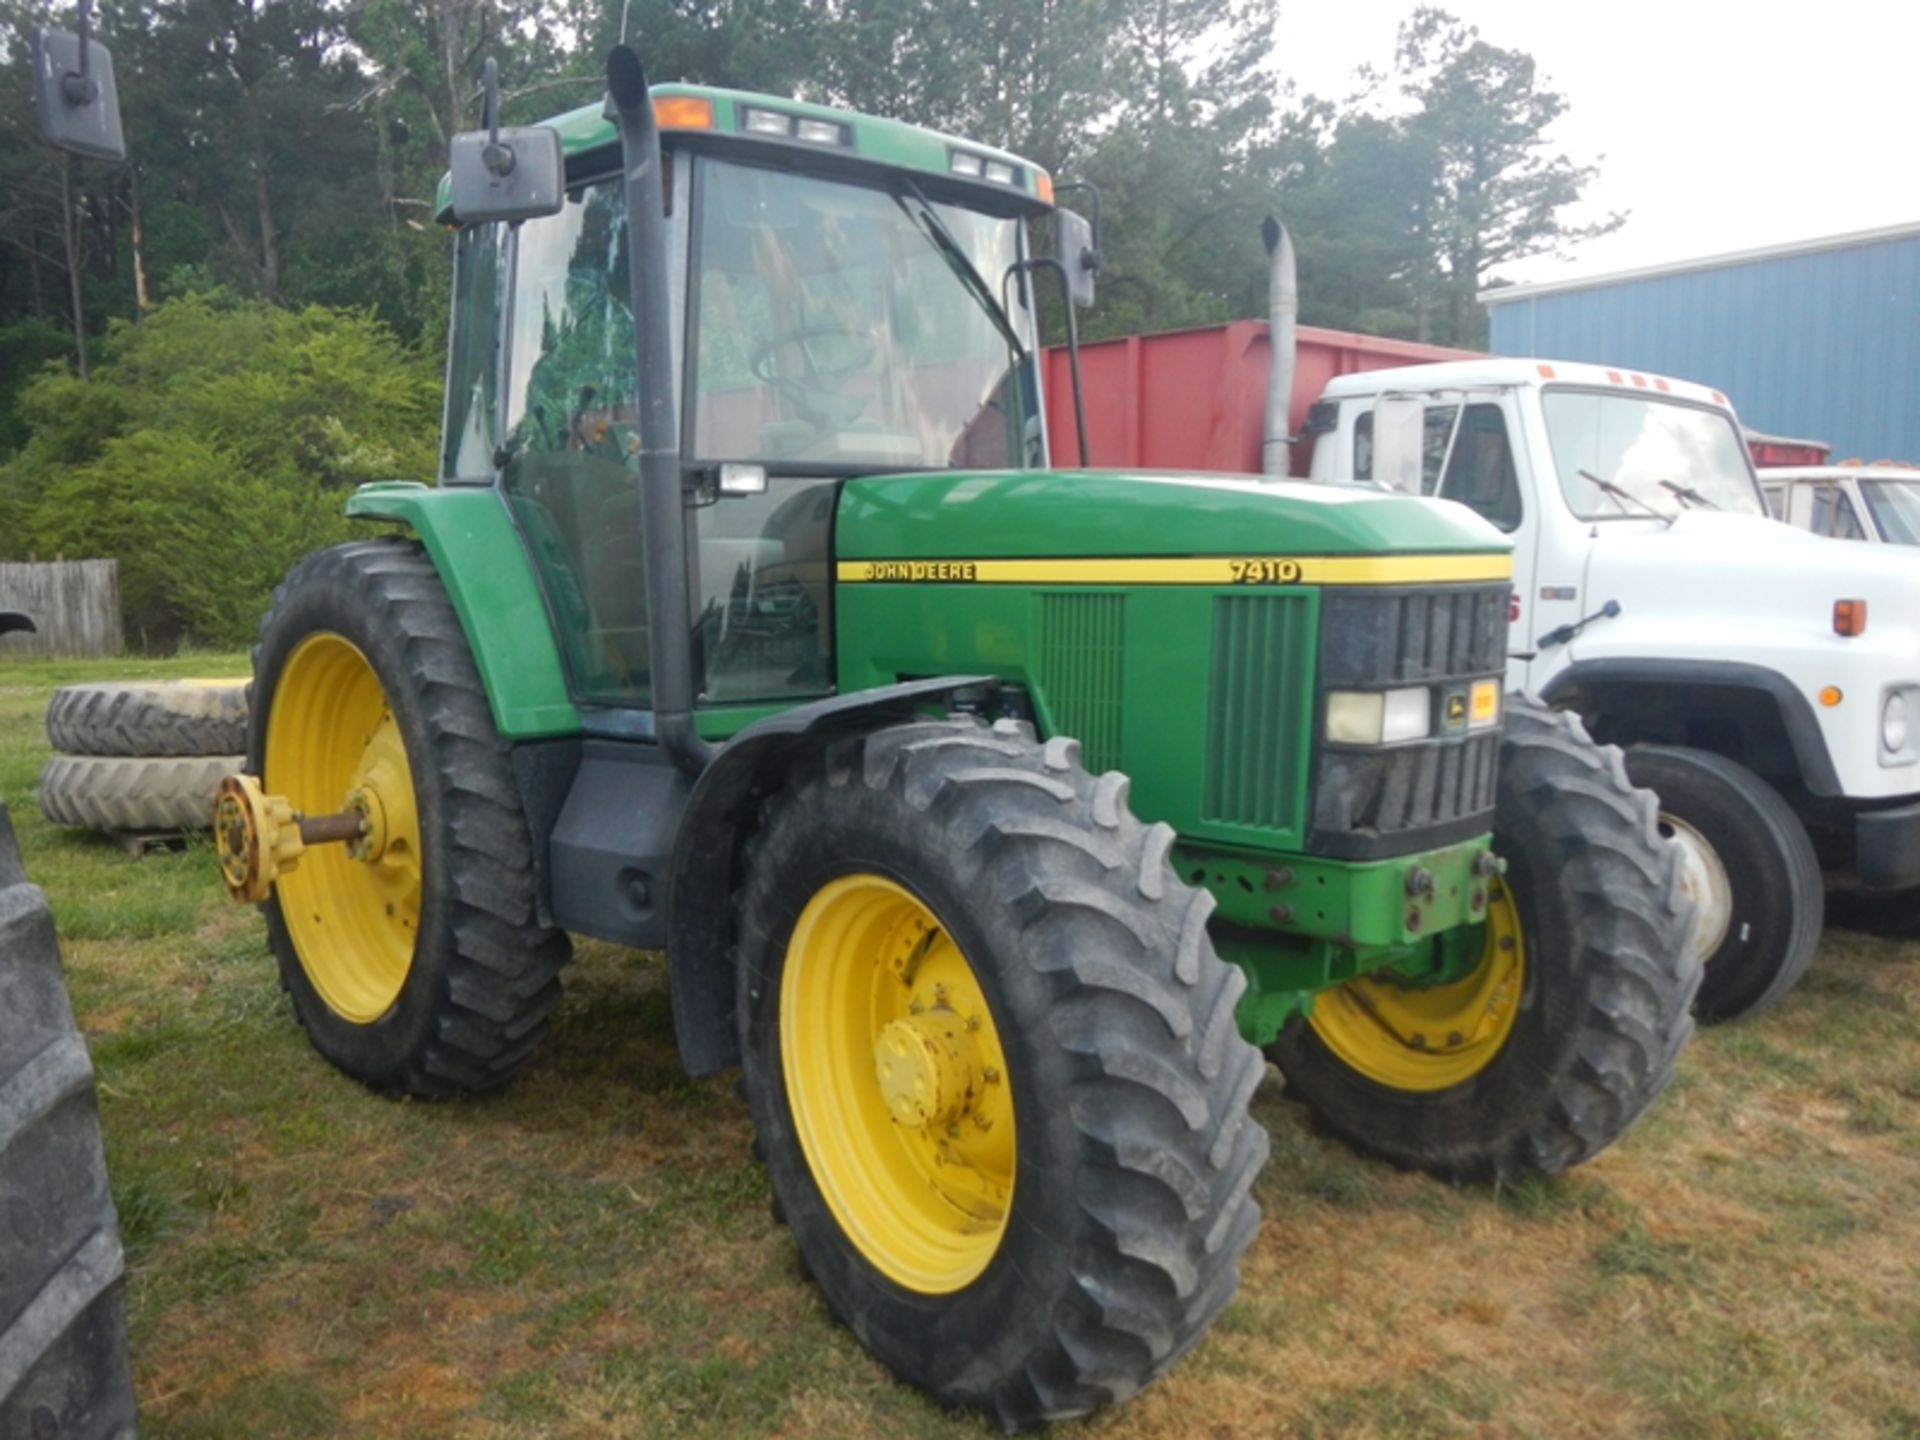 JOHN DEERE 7410 tractor - 4wd, 14.9R46 duals - 2,654 hrs - Serial RW7410H07342 - Image 2 of 6